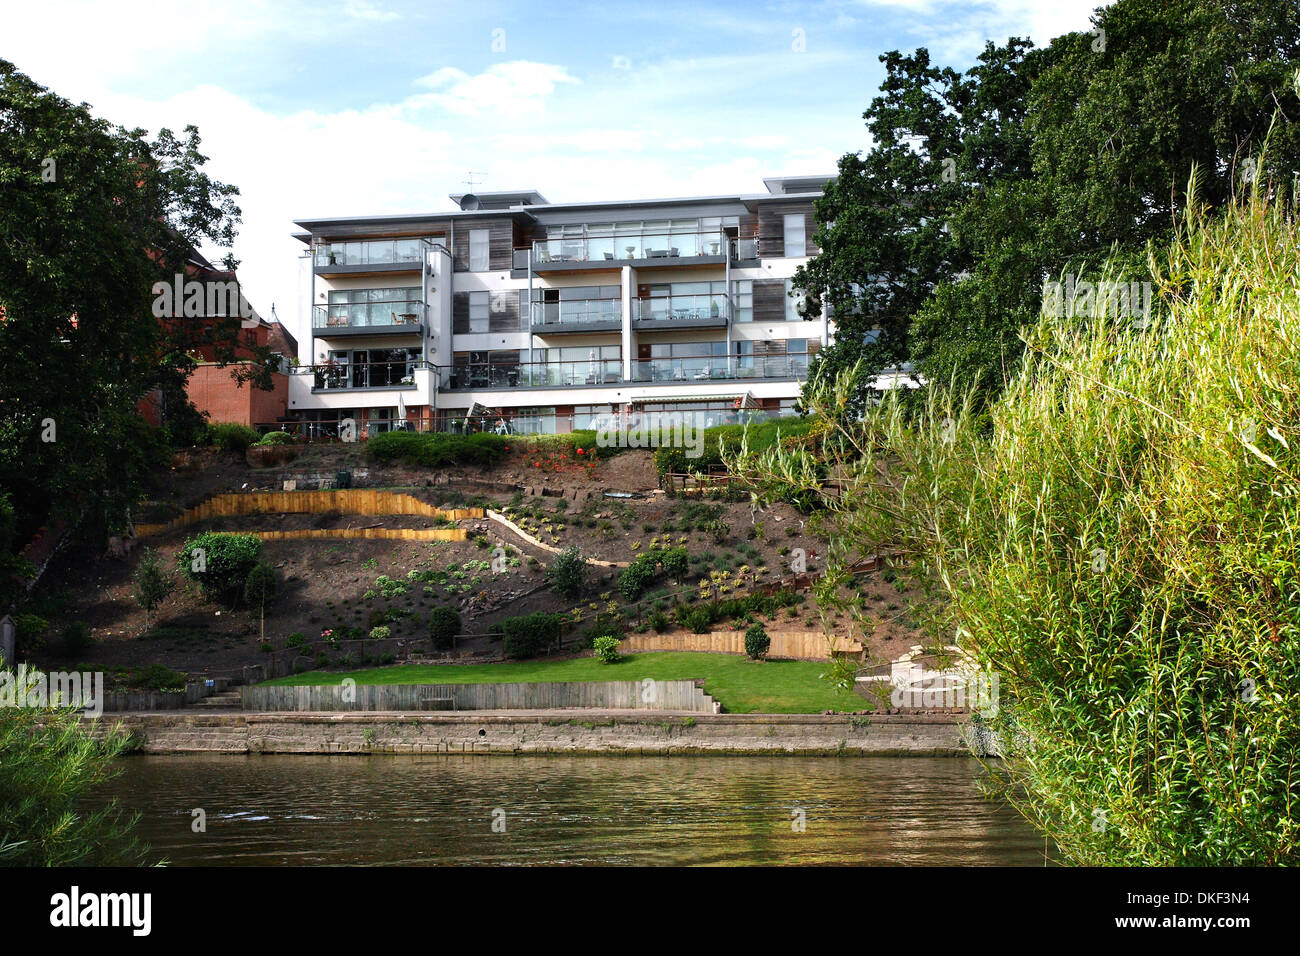 The River Dee at Chester, England, showing modern riverside apartments with terraced waterfront gardens. Stock Photo